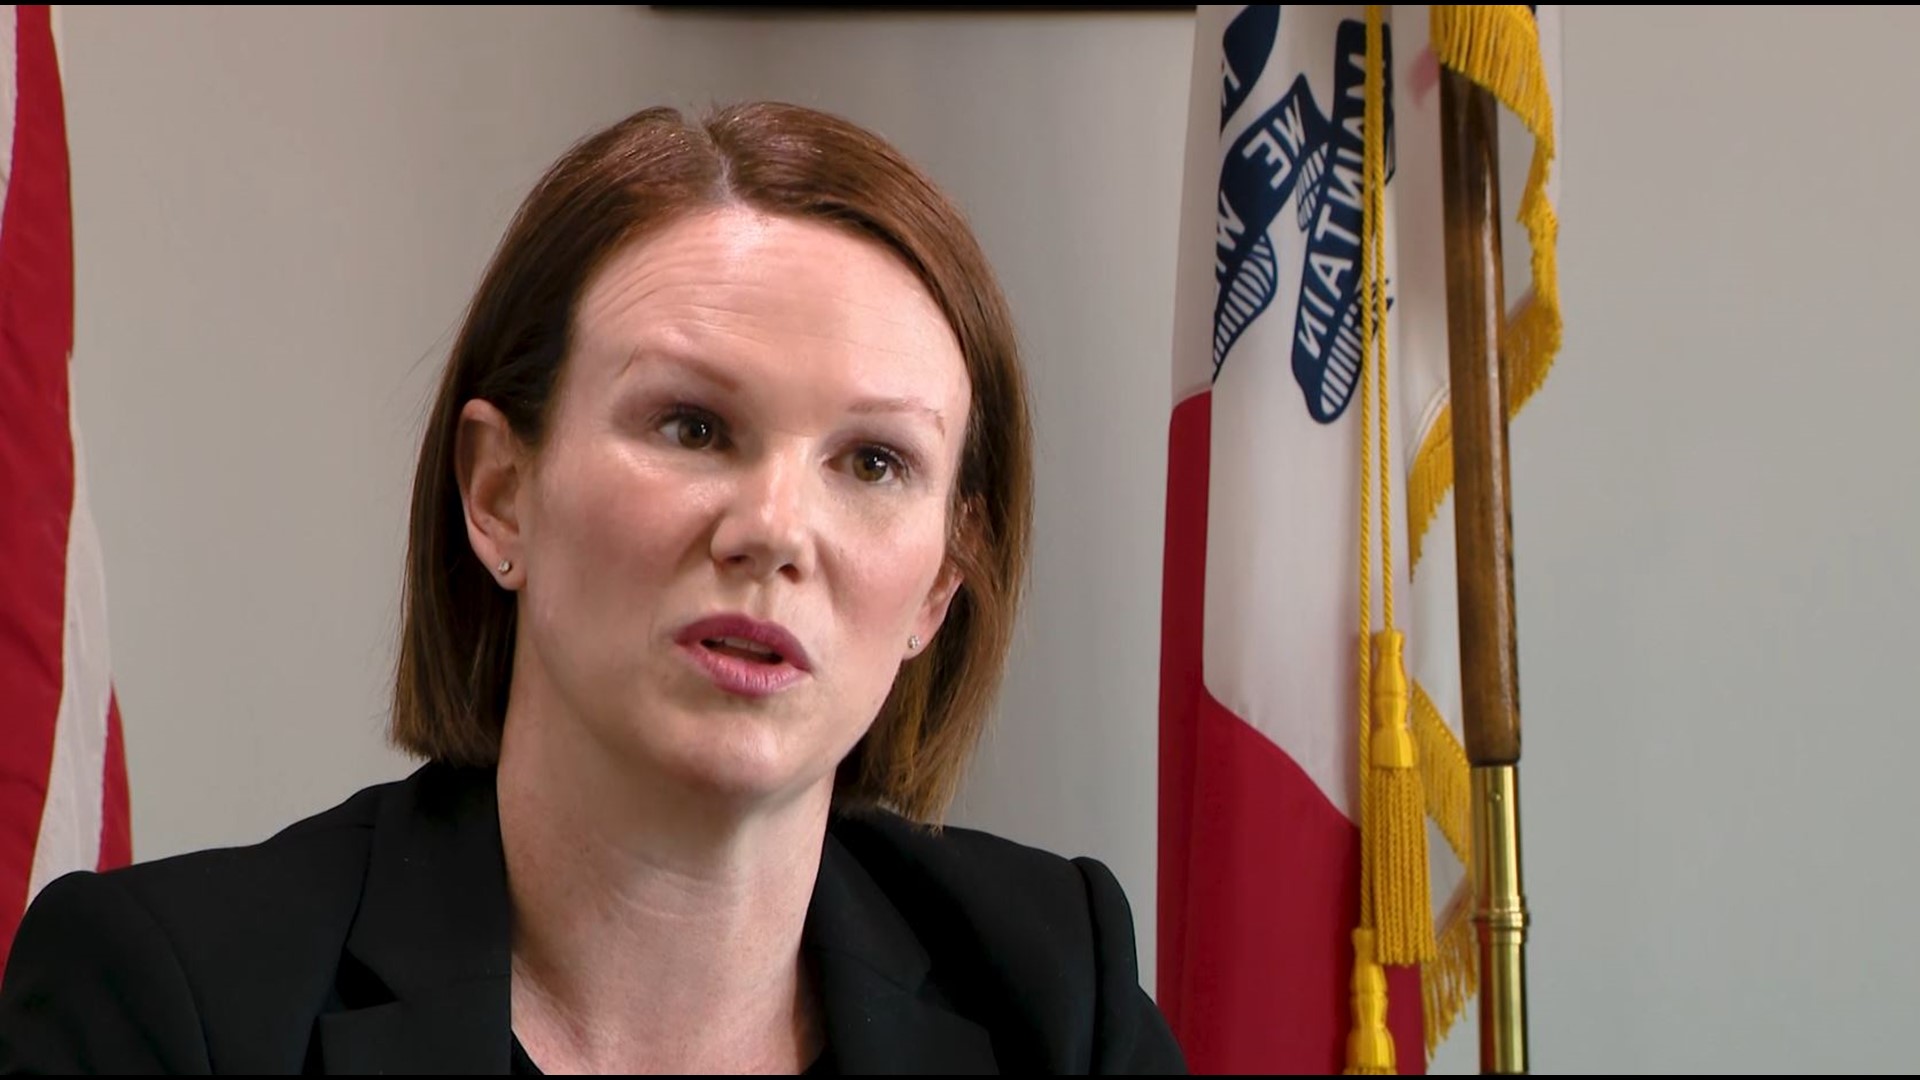 Local 5 Chief Political Correspondent & Investigative Reporter Rachel Droze sat down with Kelly Garcia to talk about Iowa's continued COVID-19 response.